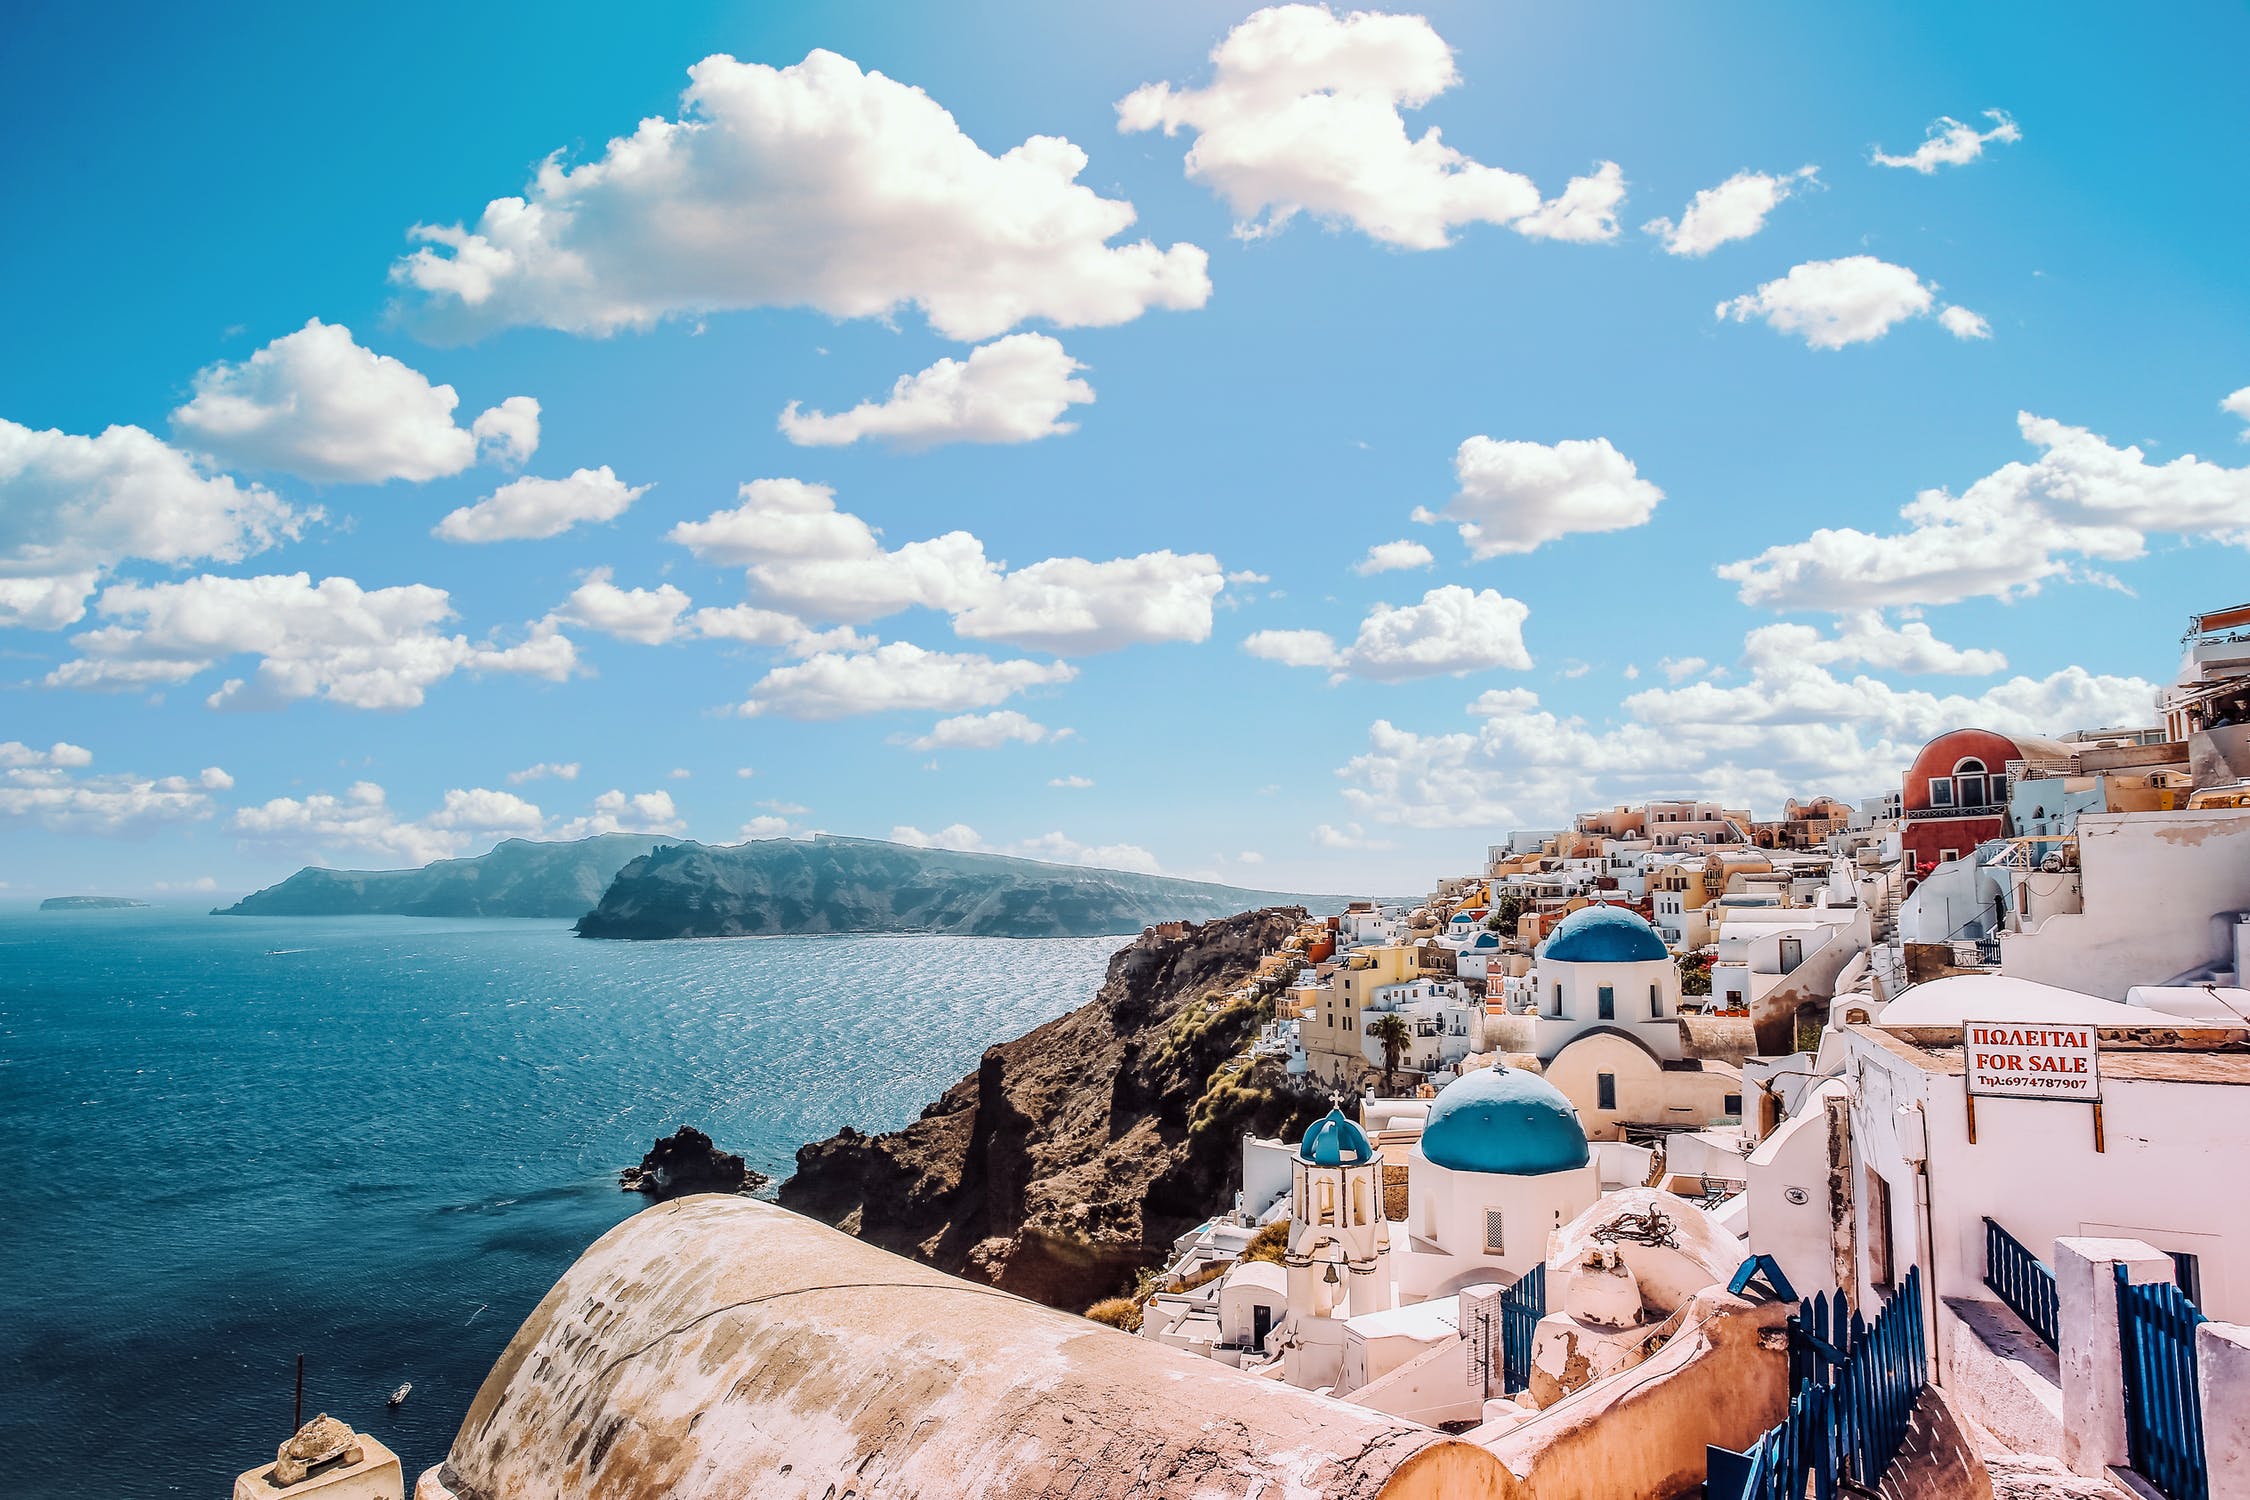 Image of Santorini featuring the iconic blue and white buildings looking out over the sea